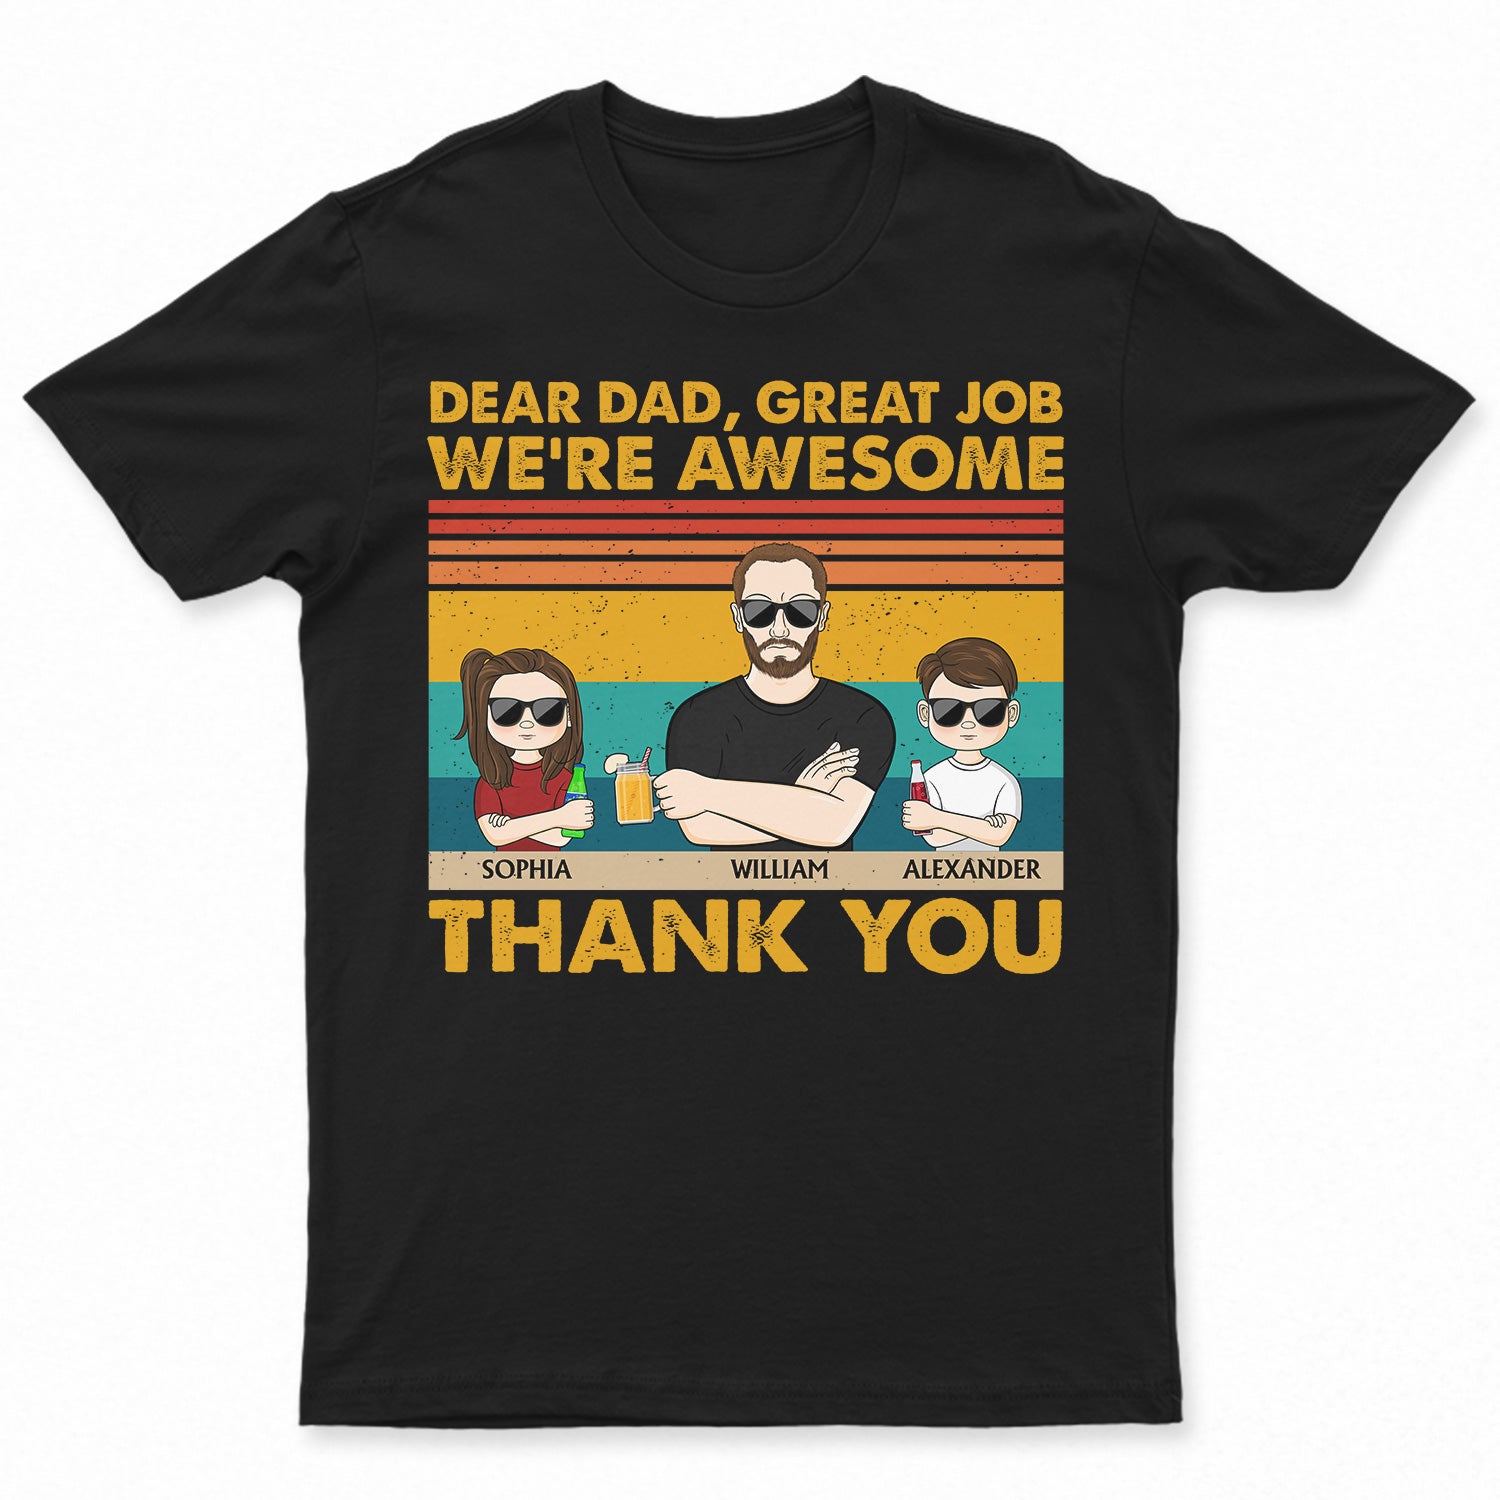 Dear Dad Great Job We're Awesome Thank You - Funny, Birthday Gift For Father, Husband - Personalized Custom T Shirt